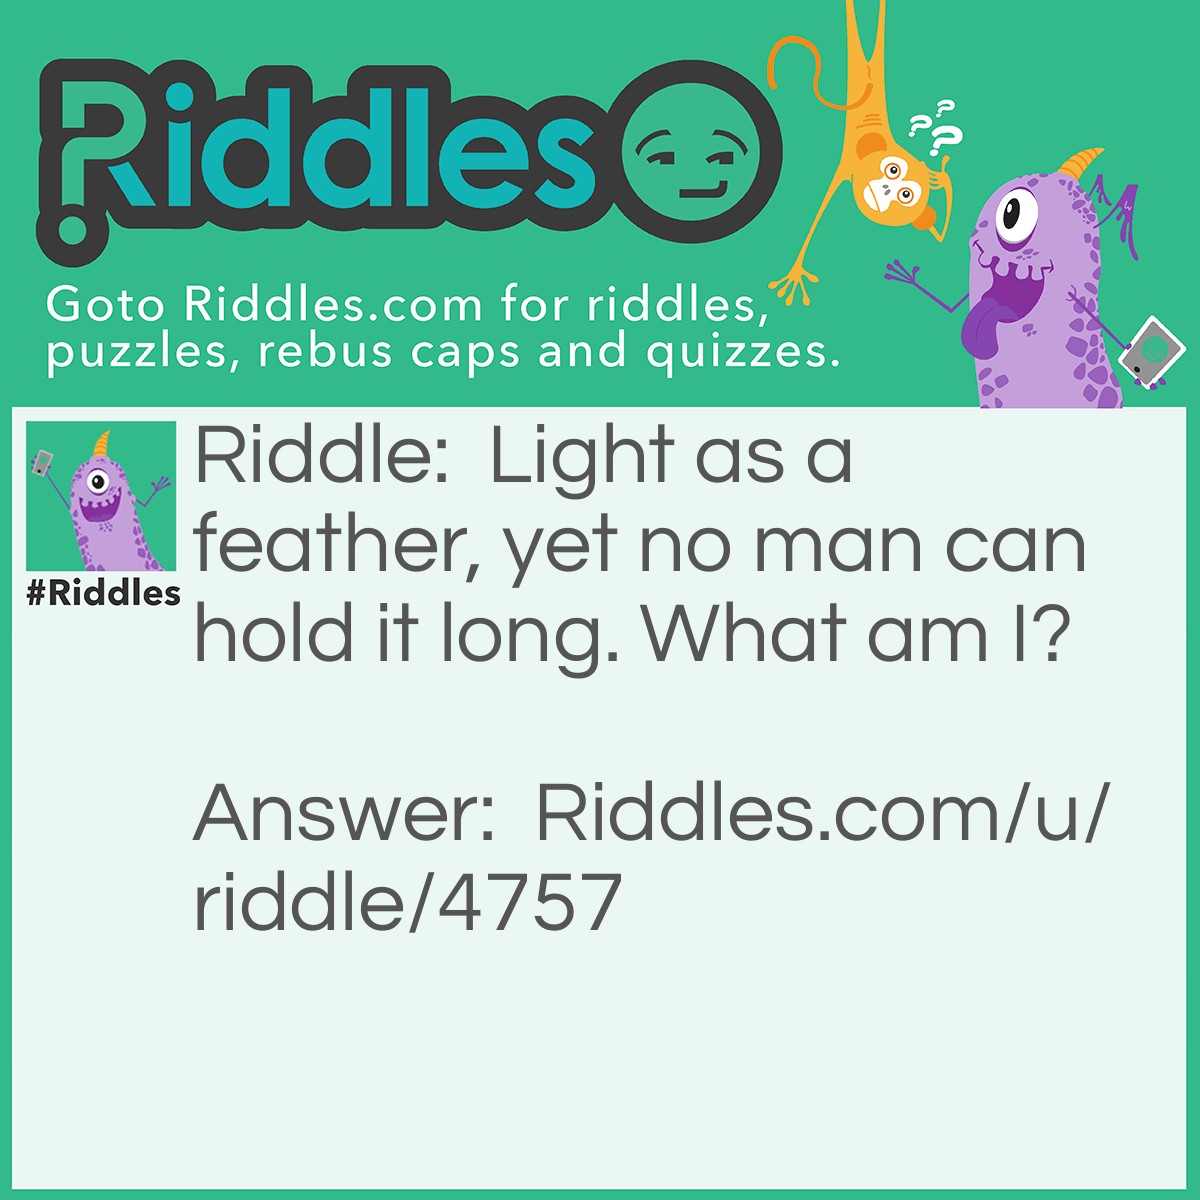 Riddle: Light as a feather, yet no man can hold it long. What am I? Answer: Your Breath.